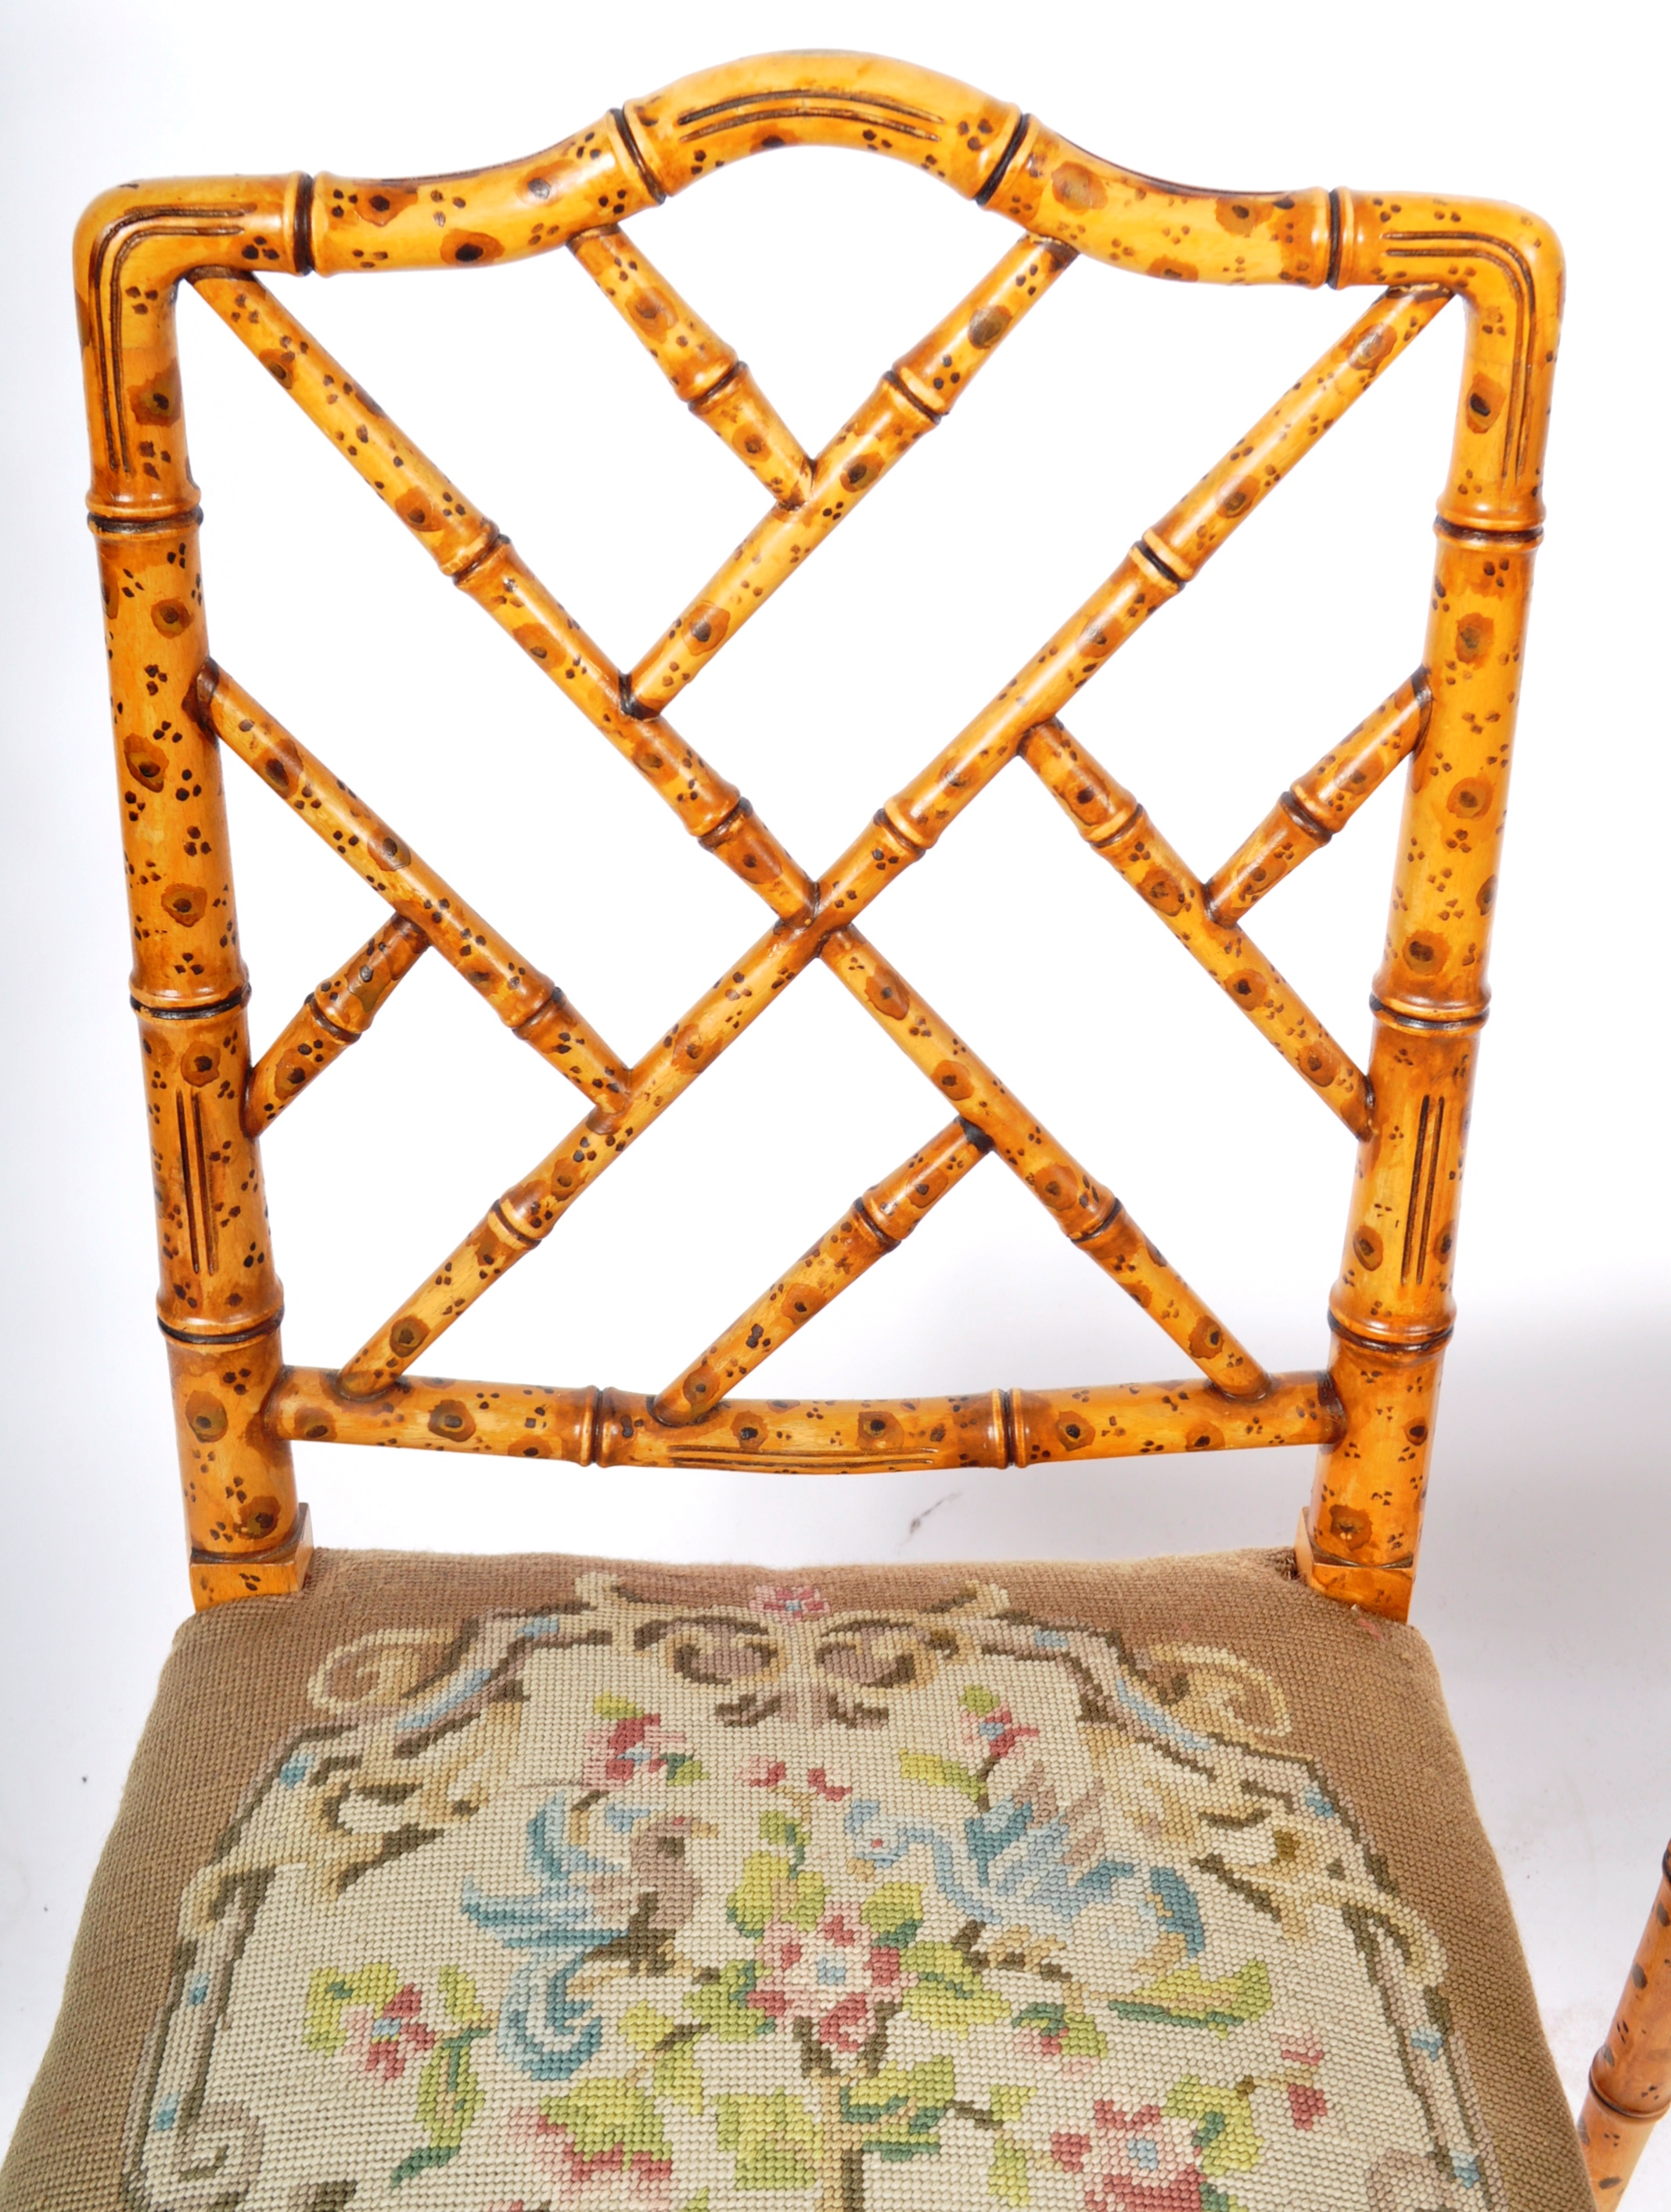 MATCHING PAIR OF 18TH CENTURY STYLE FAUX BAMBOO CHAIRS - Image 3 of 7